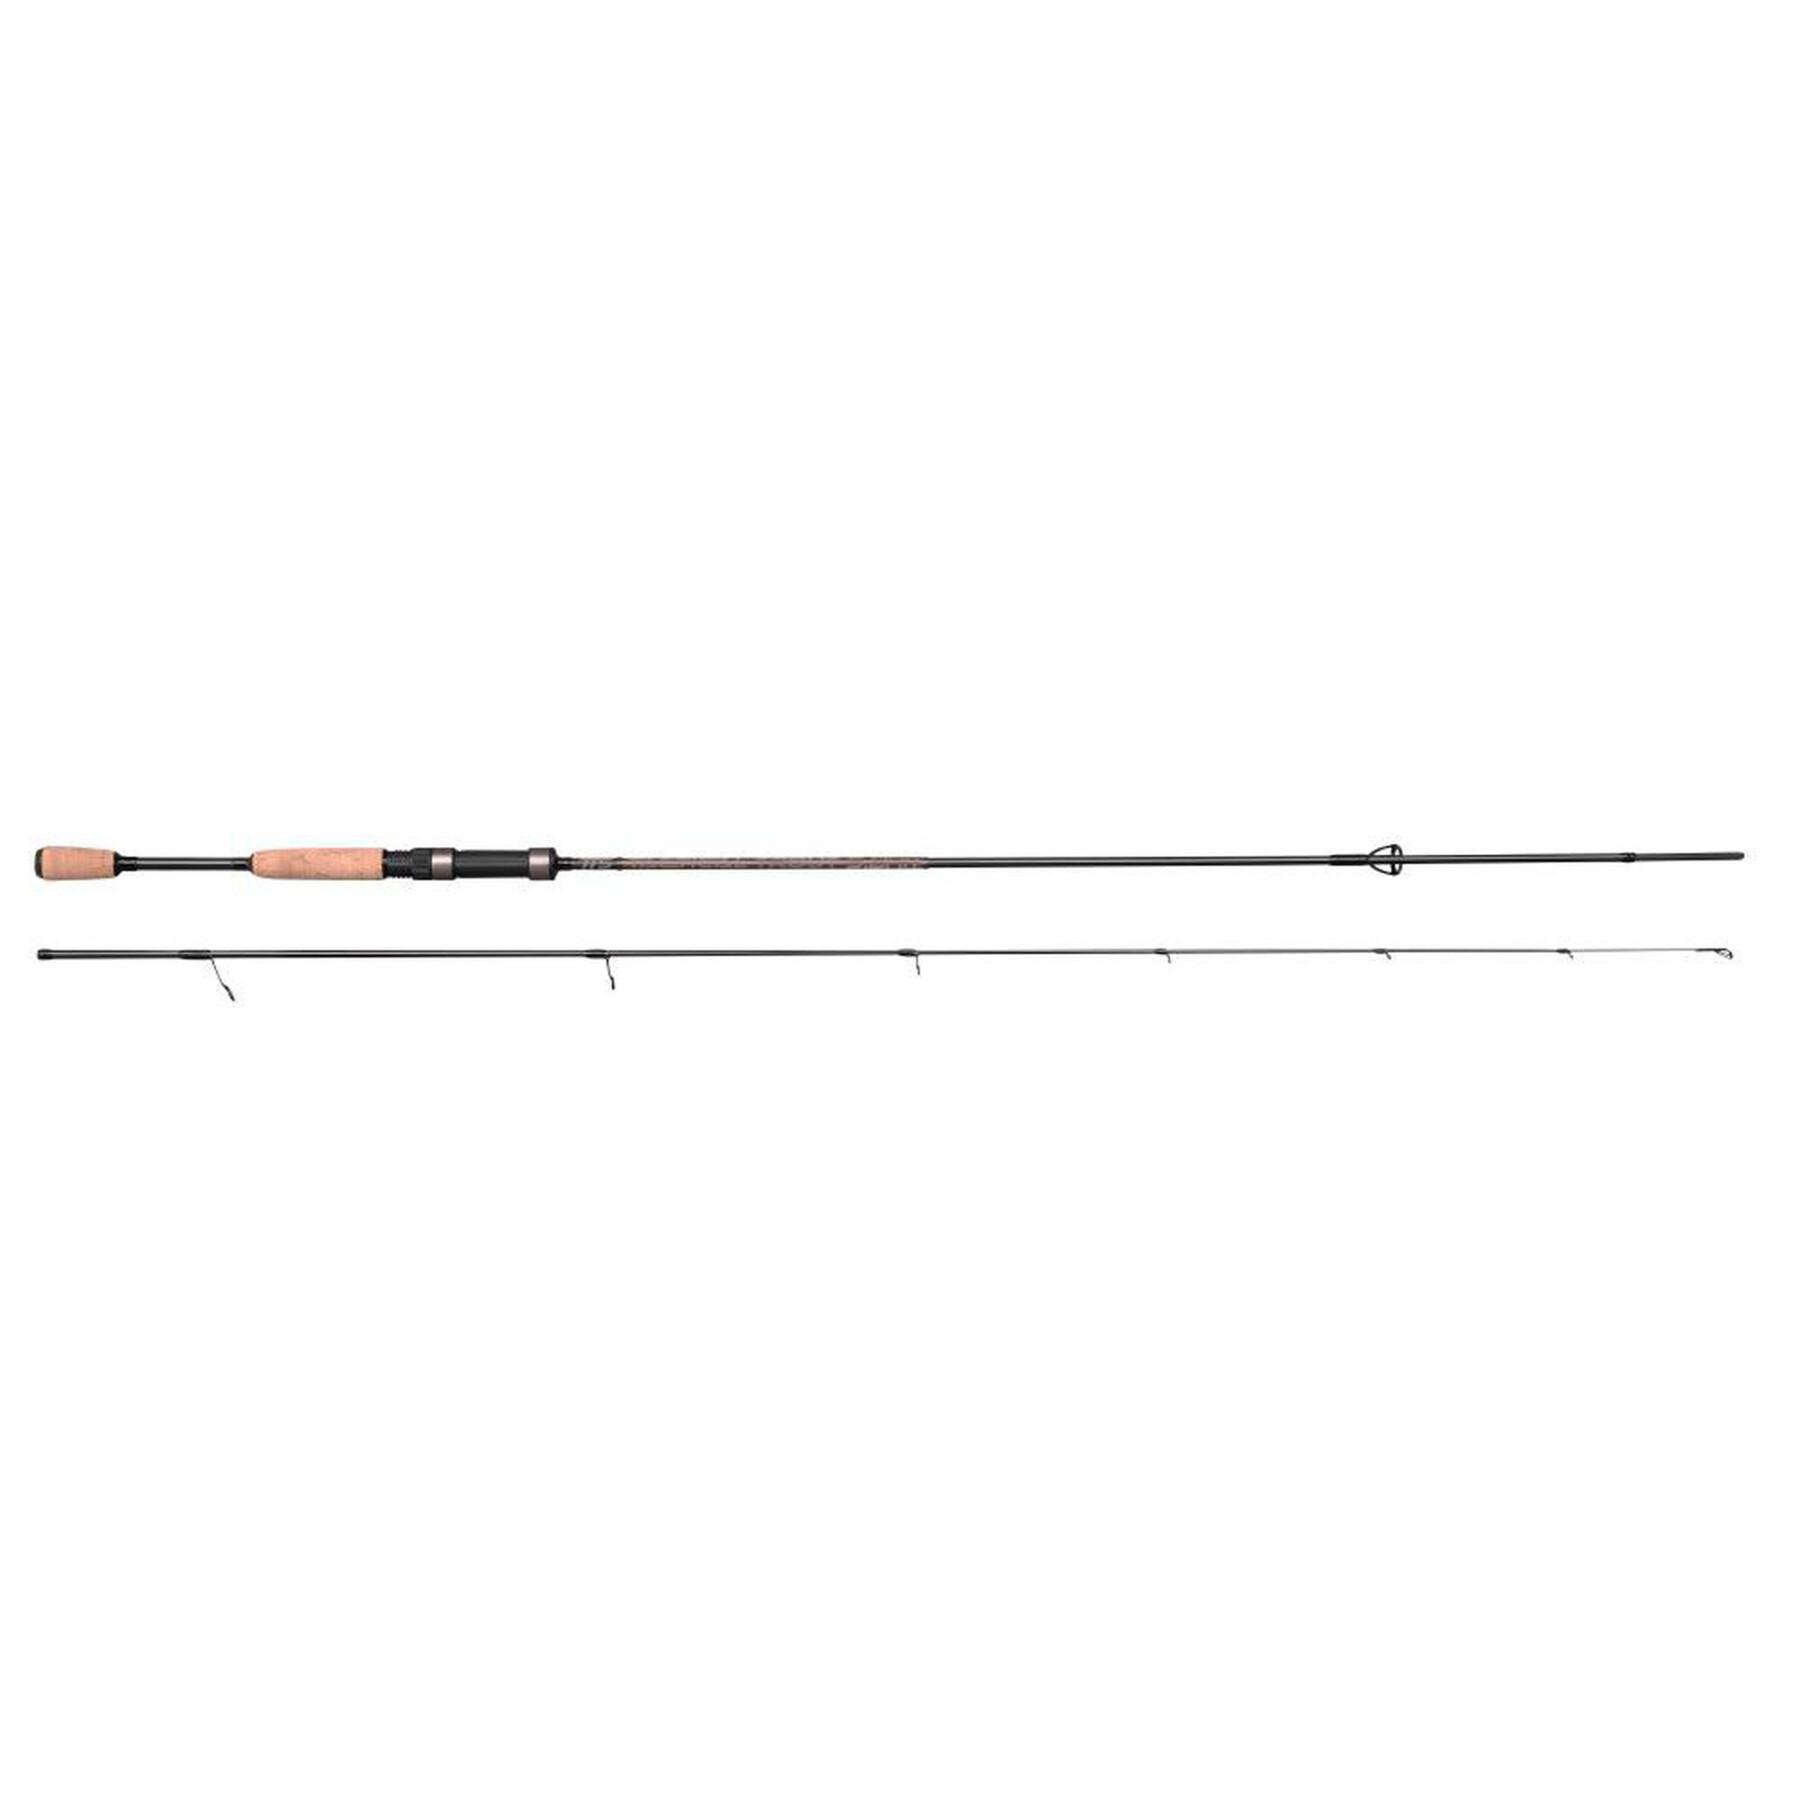 Spinning rod Spro tactical trout s.bait 1-8g